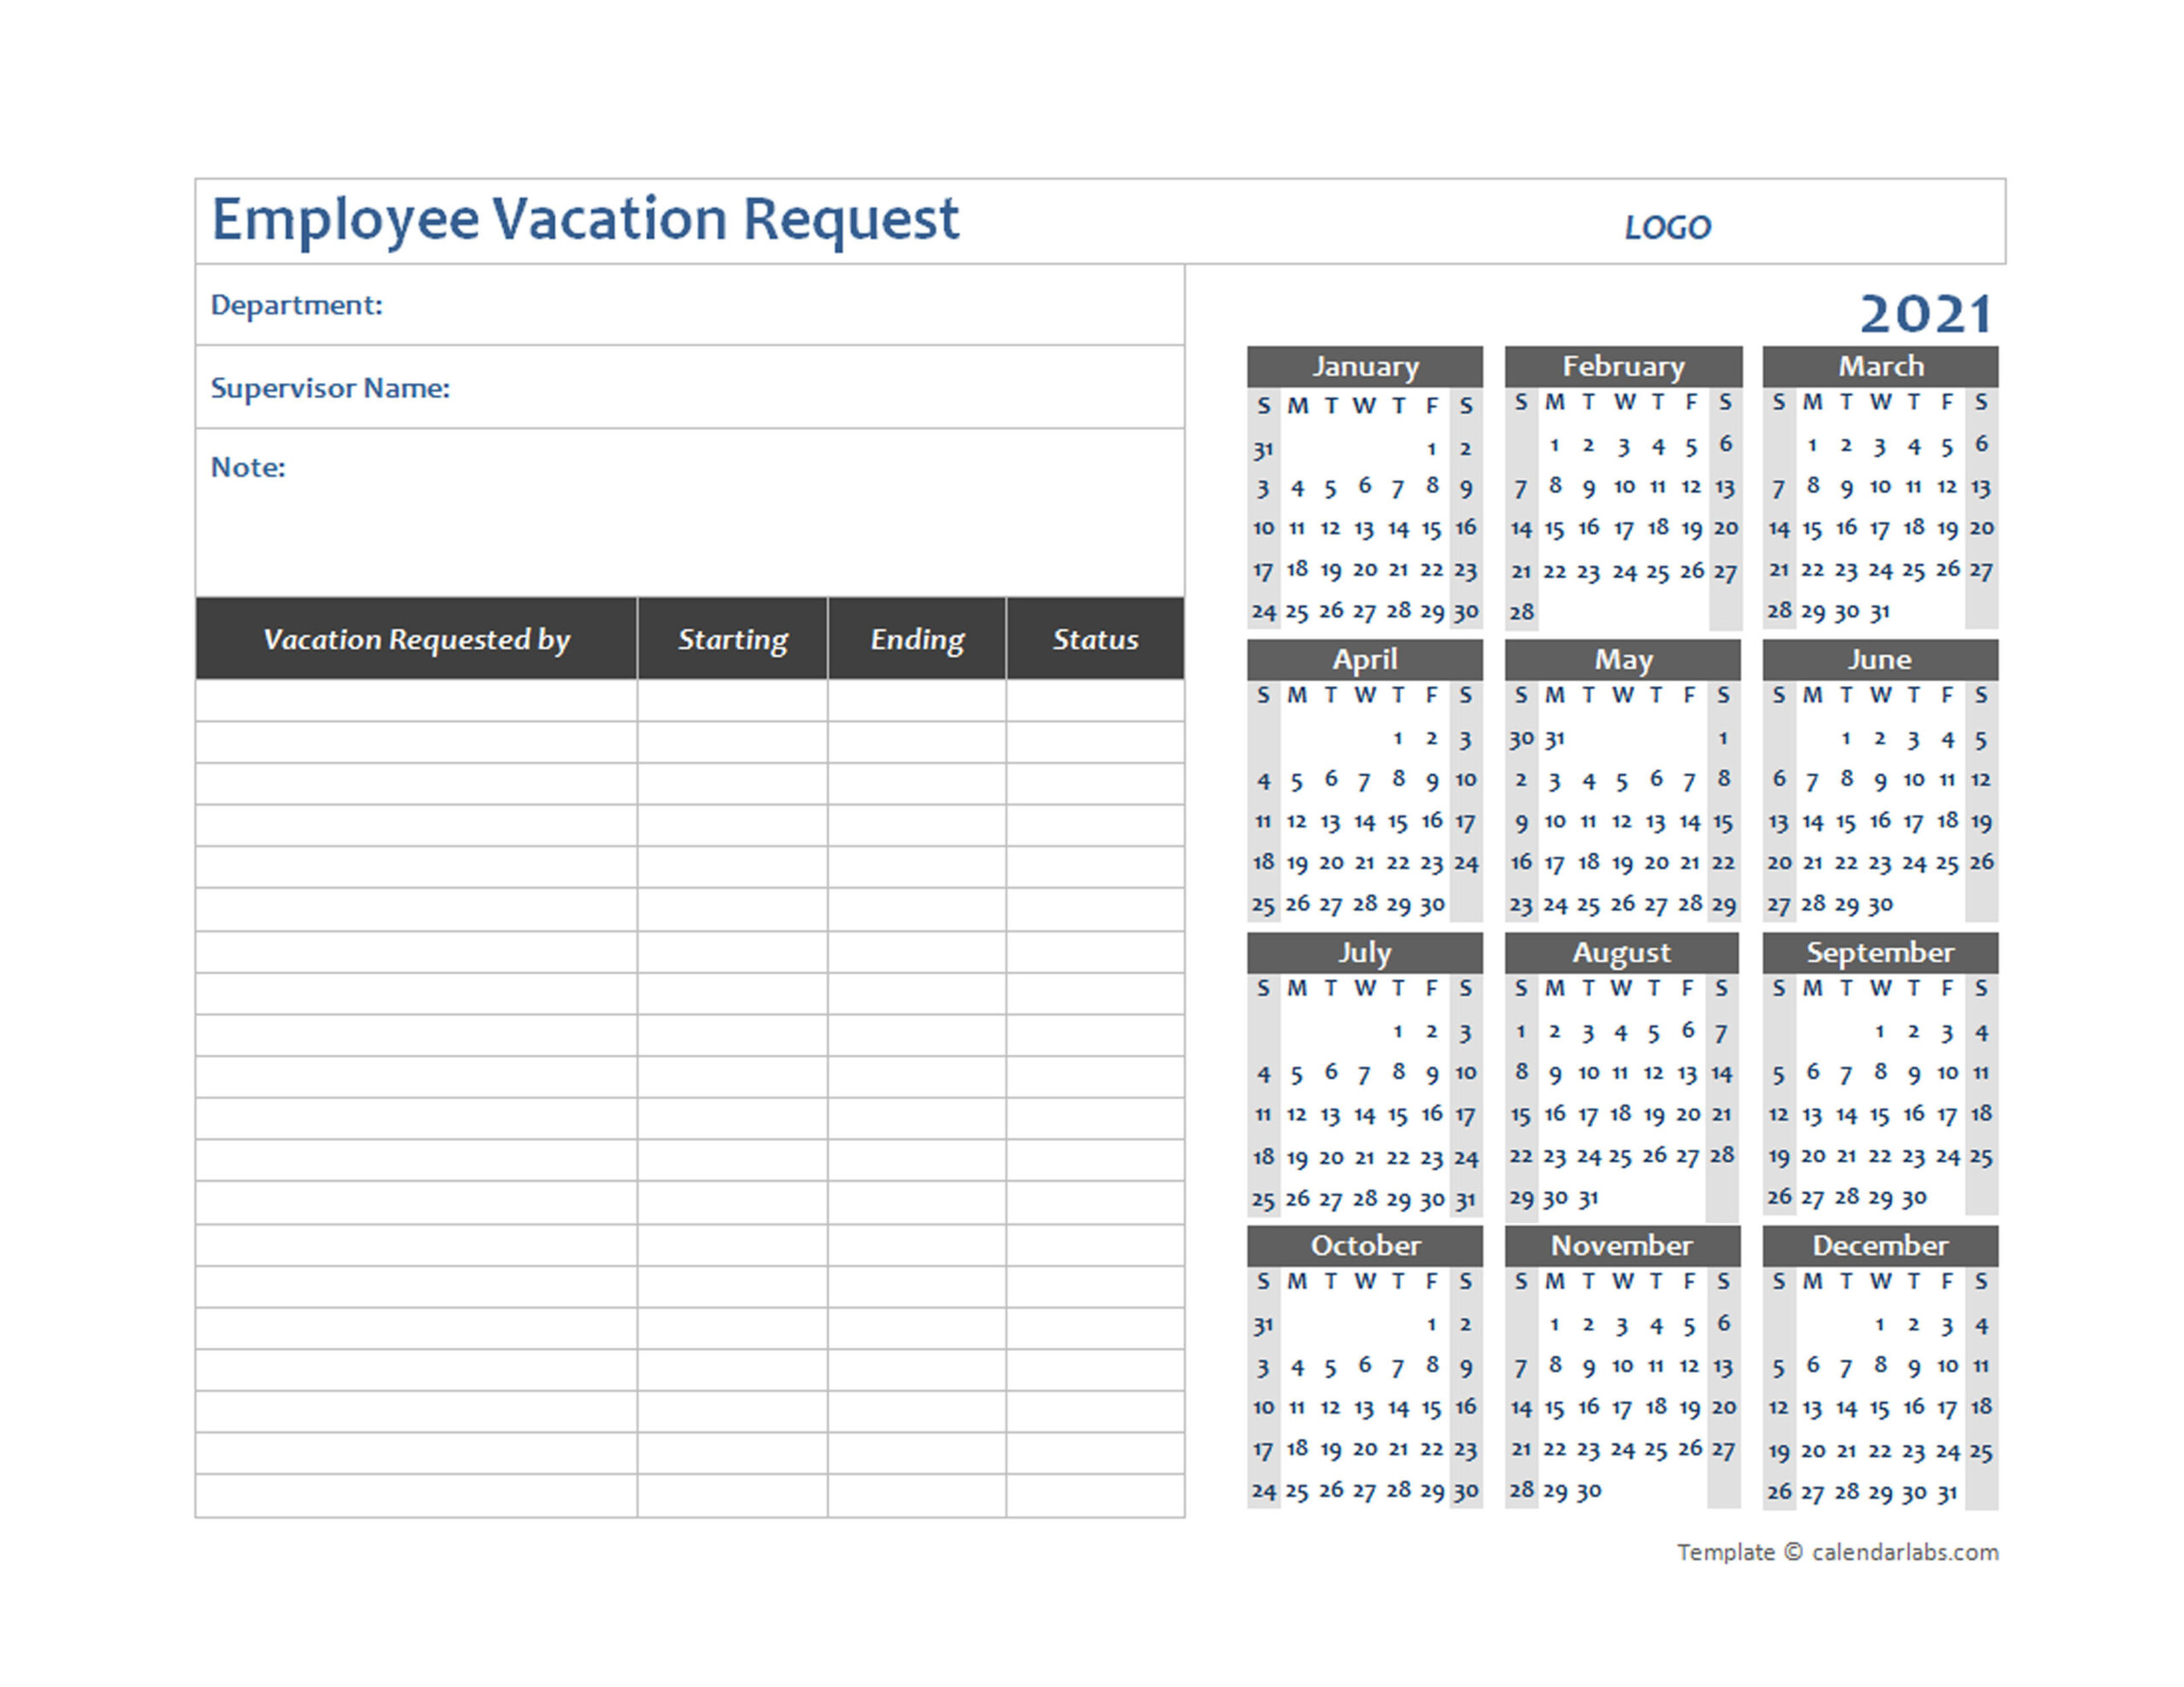 2021 Business Employee Vacation Request - Free Printable-2021 Employee Vacation Calendar Excel